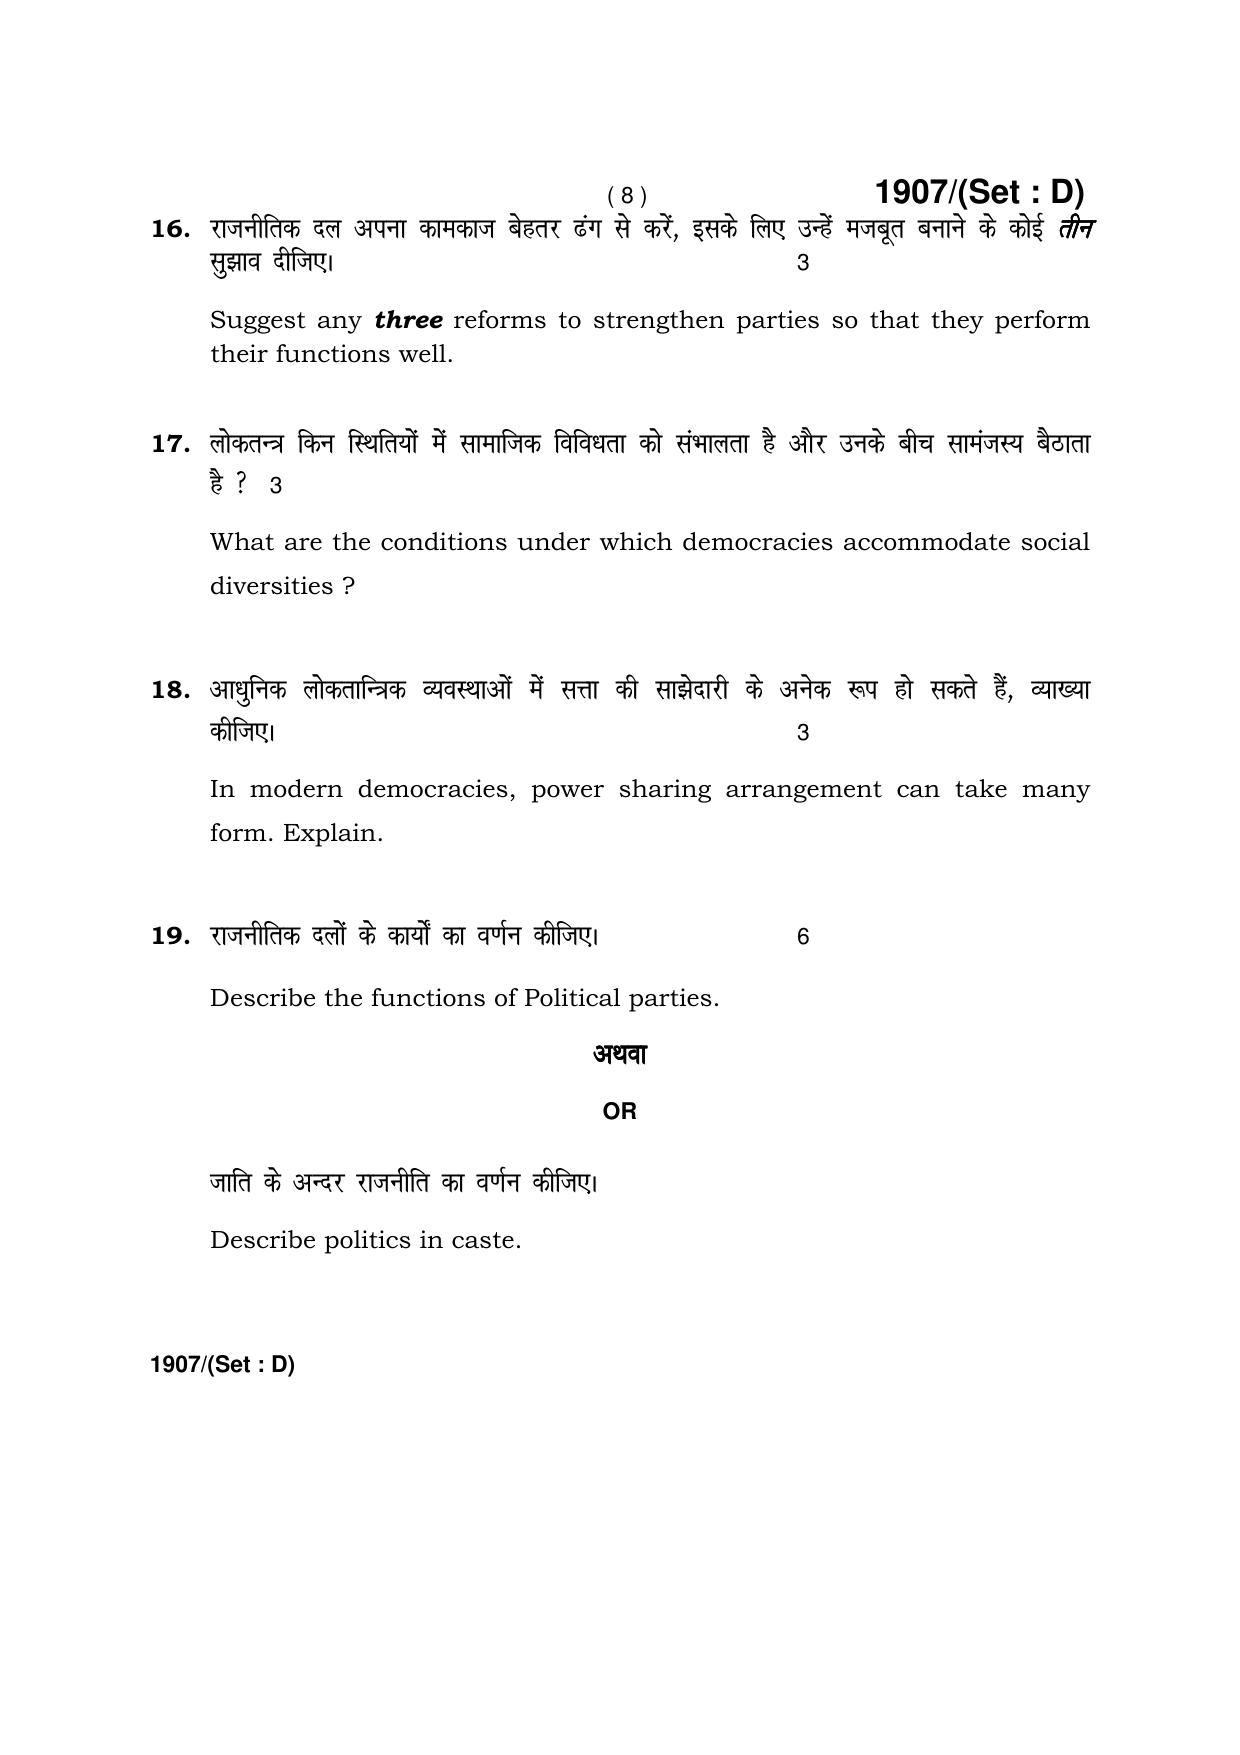 Haryana Board HBSE Class 10 Social Science -D 2017 Question Paper - Page 8